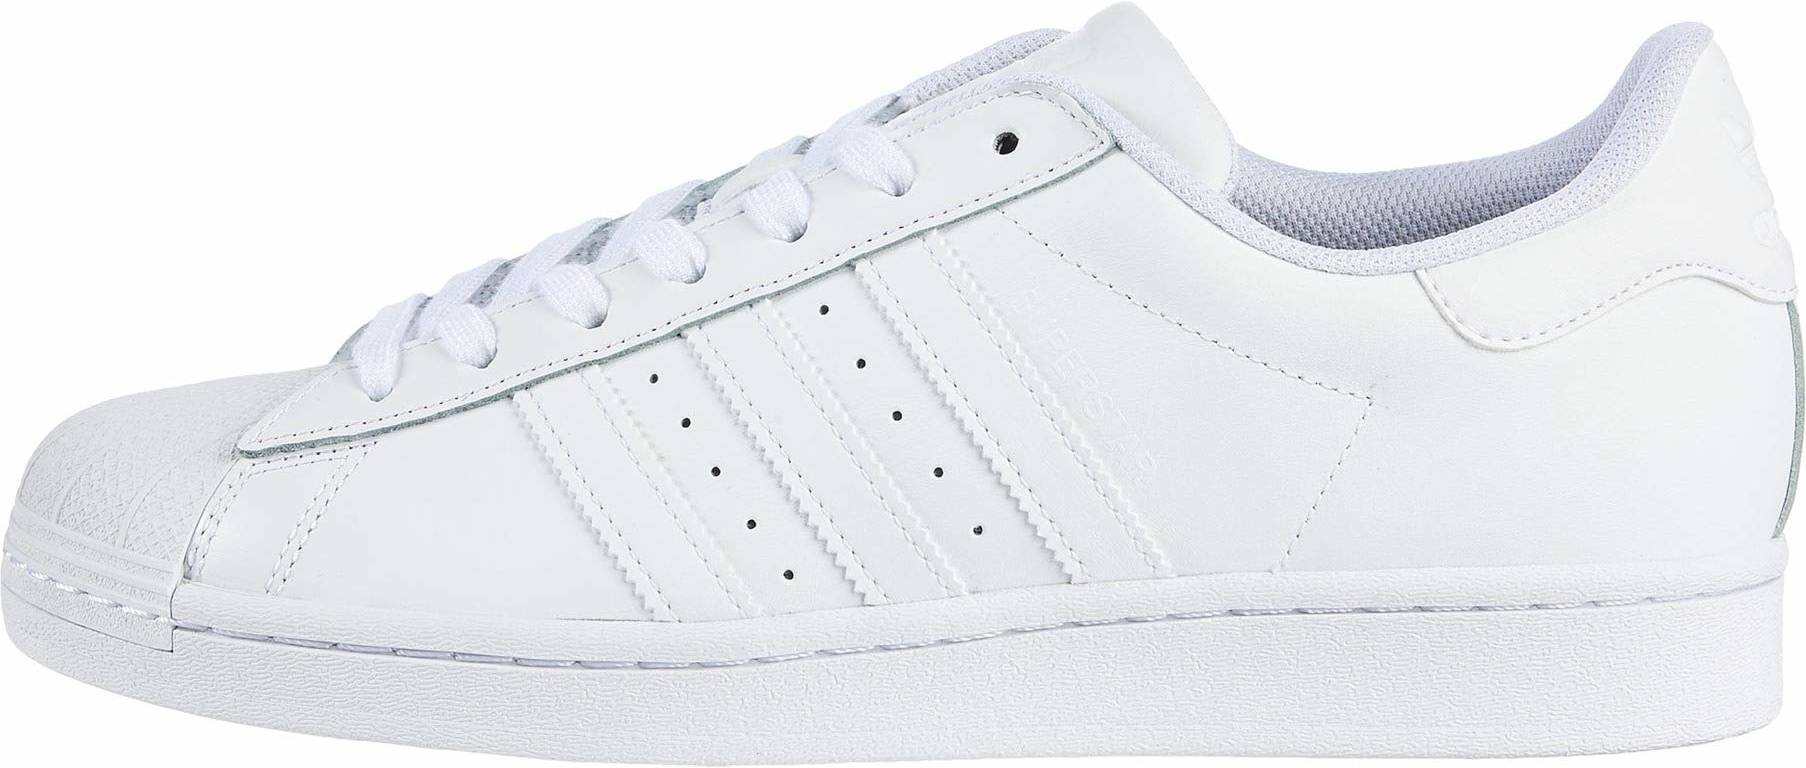 Only $27 + Review of Adidas Superstar 